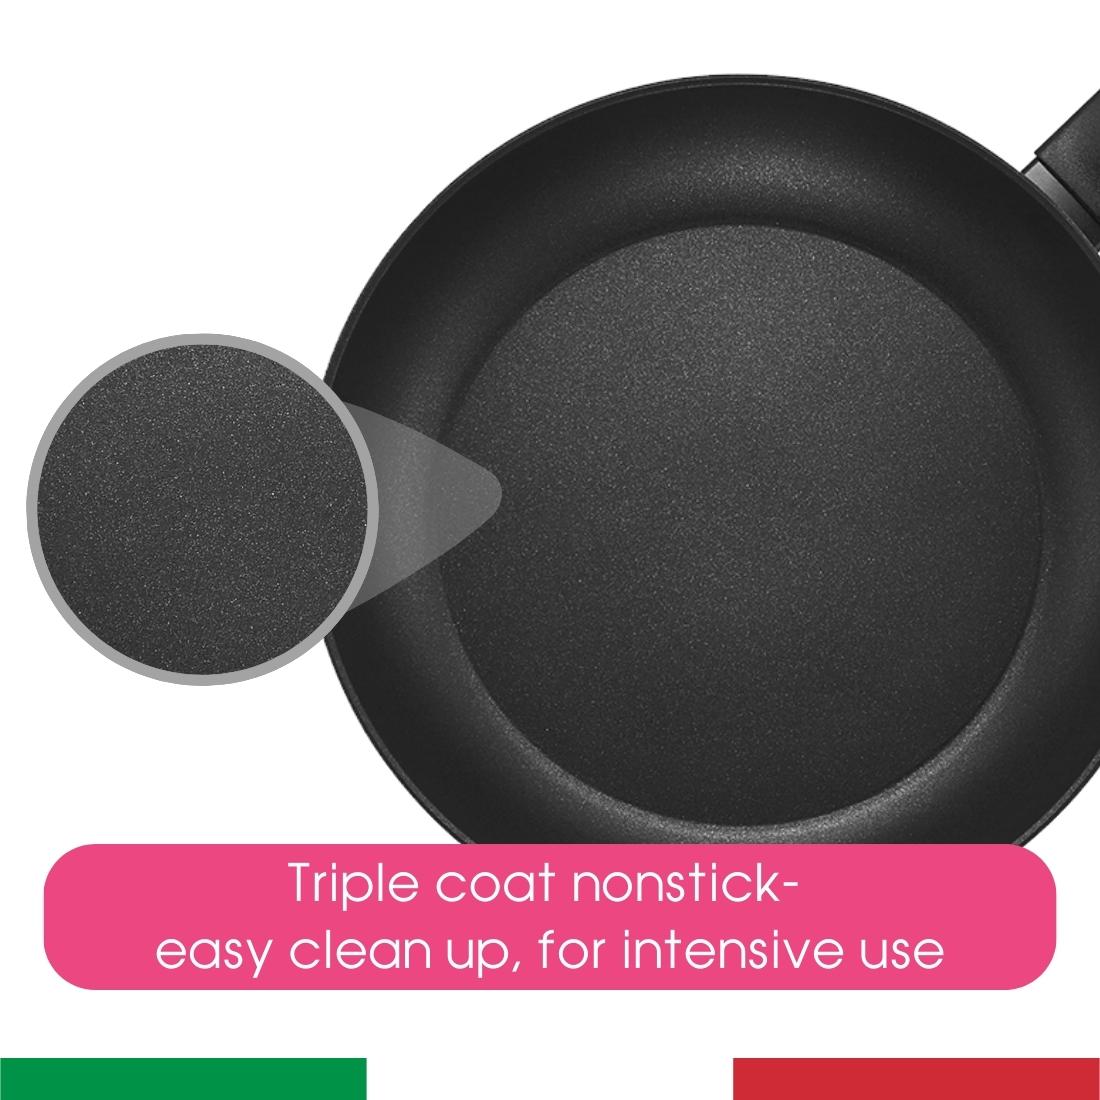 Raco Minerale Nonstick Induction 5 Piece Cookware Set